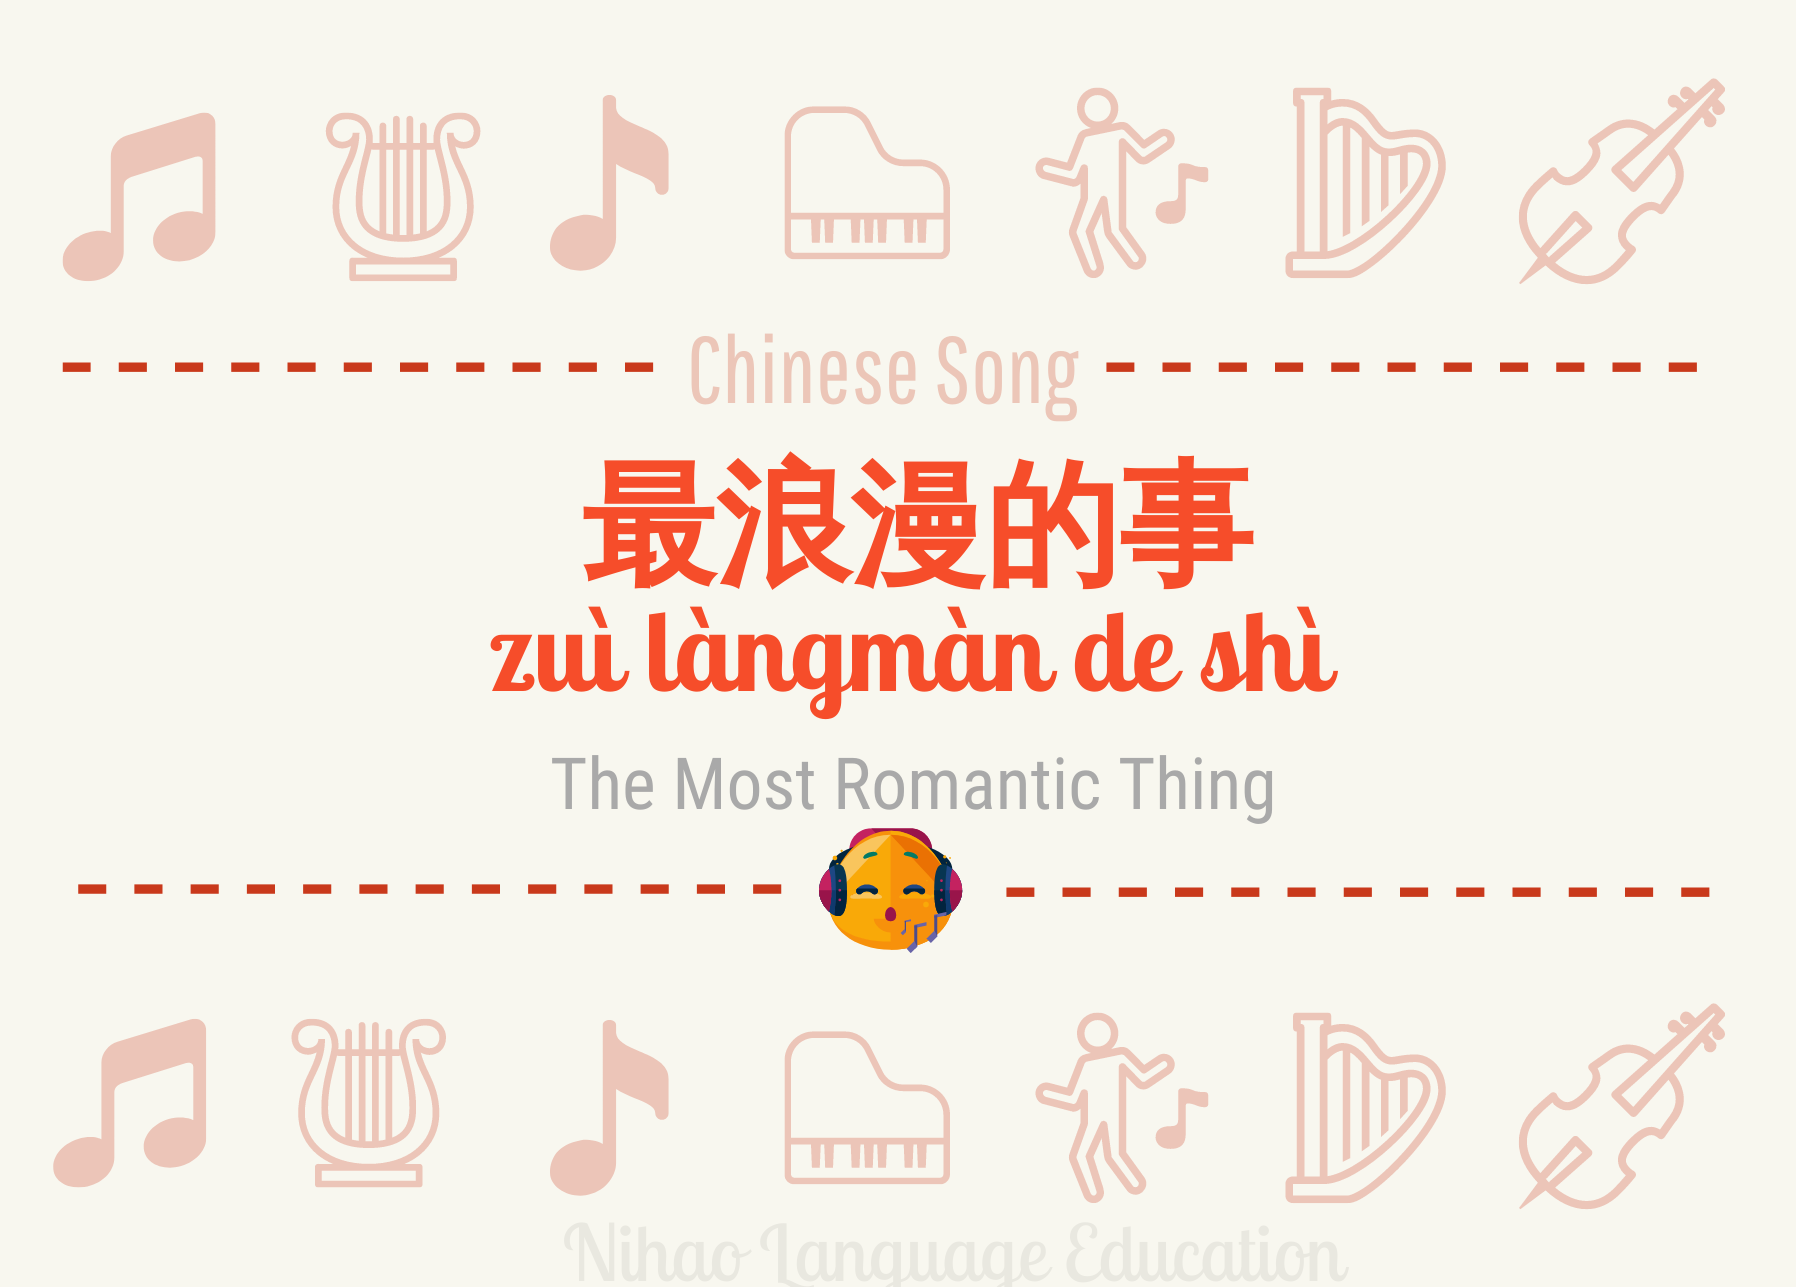 5 Popular Chinese Songs to Improve Your Mandarin Chinese